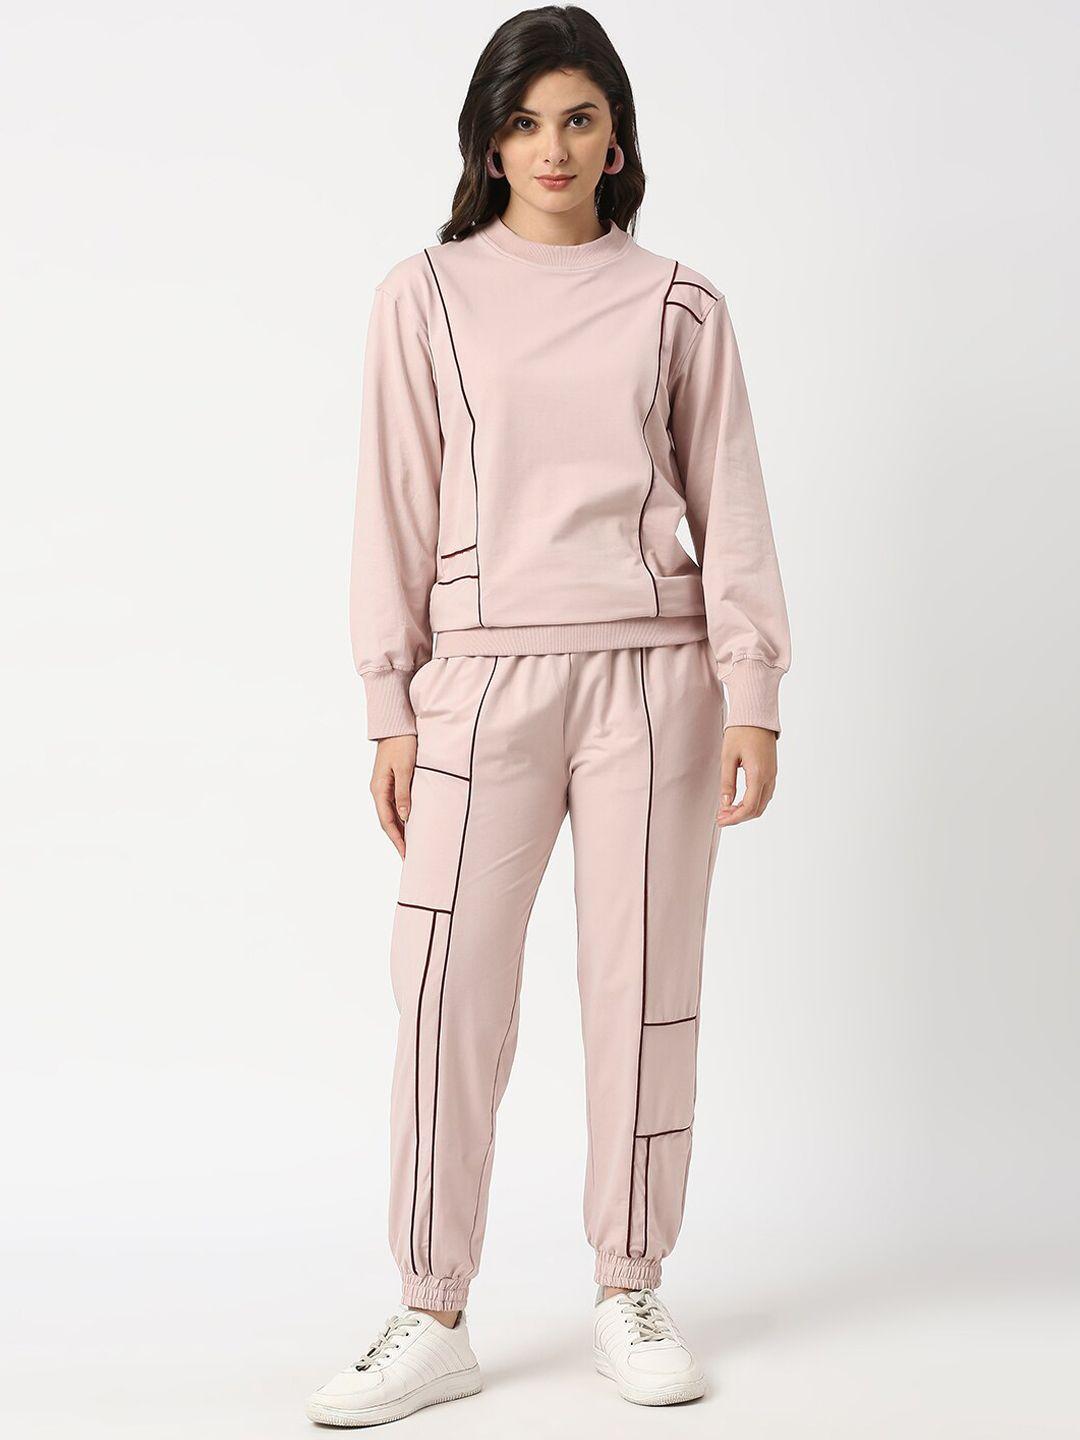 anwaind mauve round neck sweatshirt and joggers co-ords